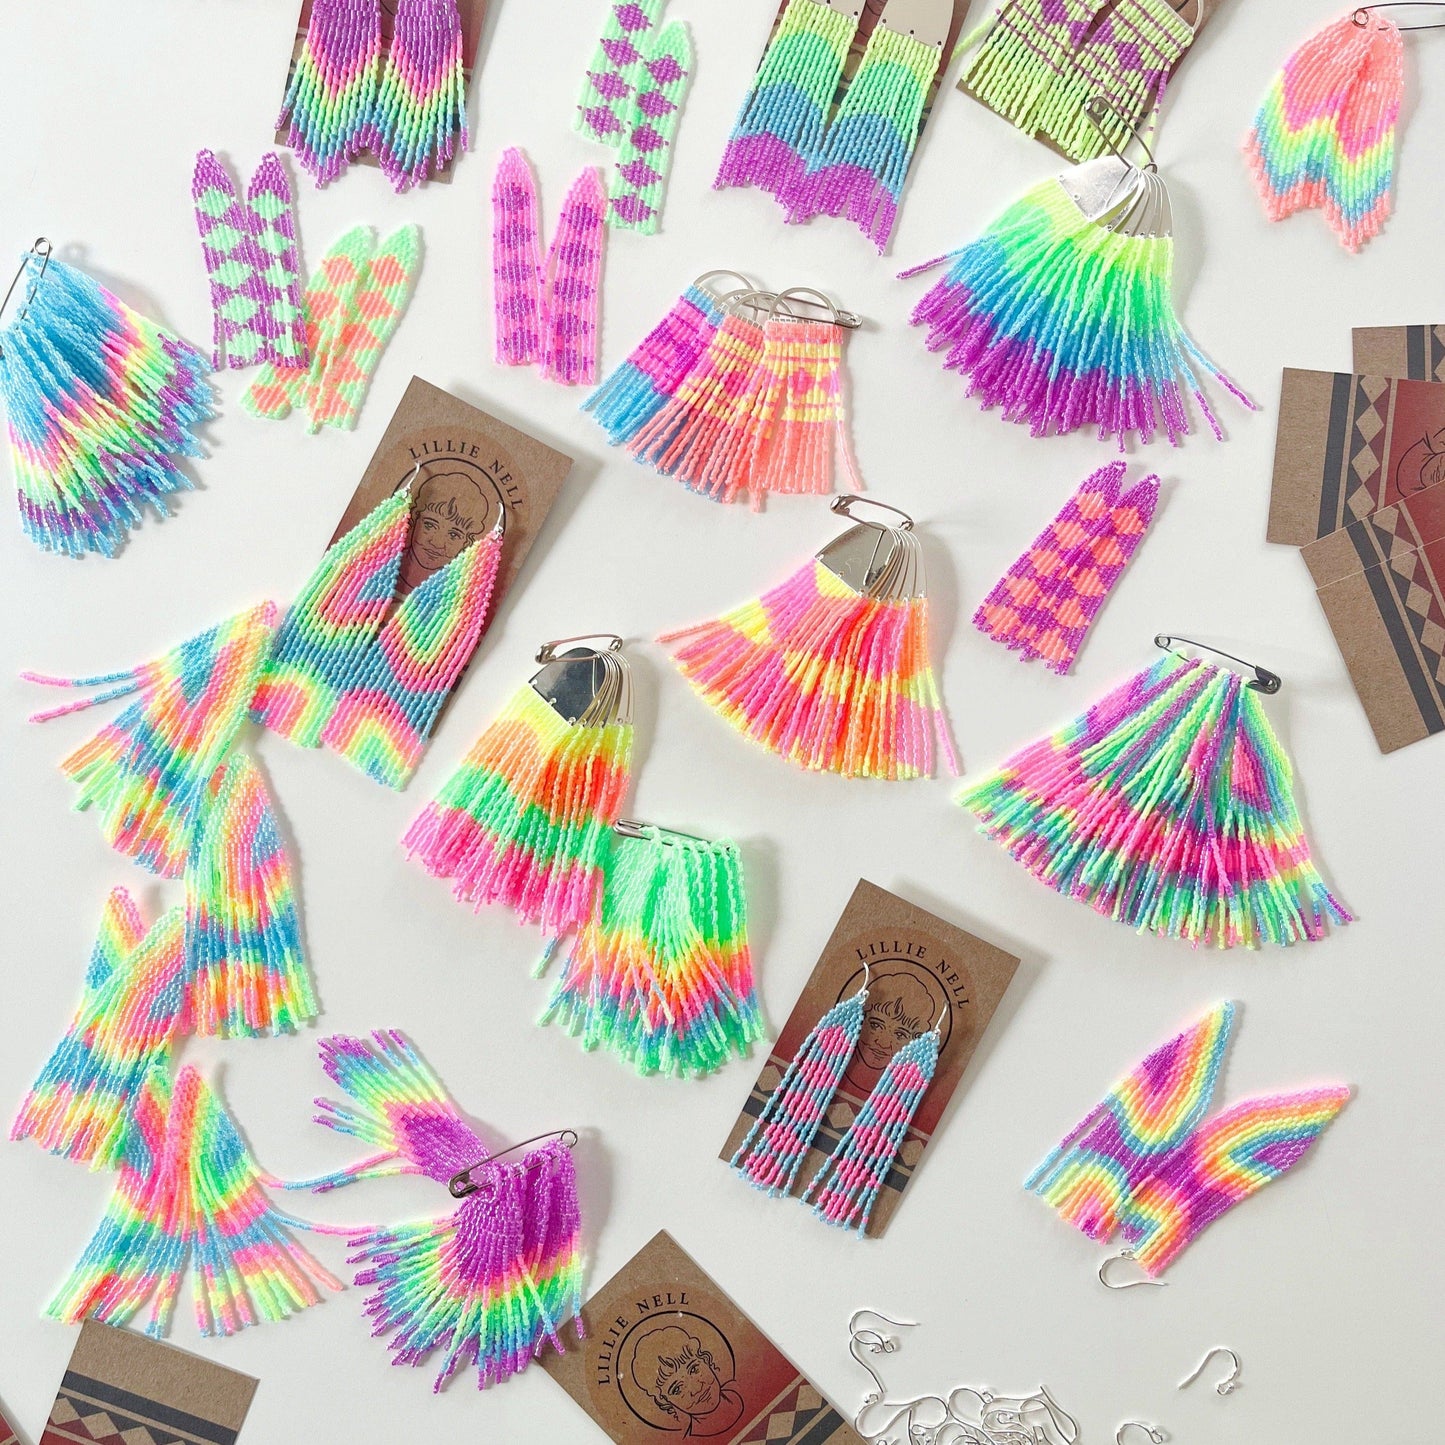 Lillie Nell Neon Rainbow Collection Earrings in